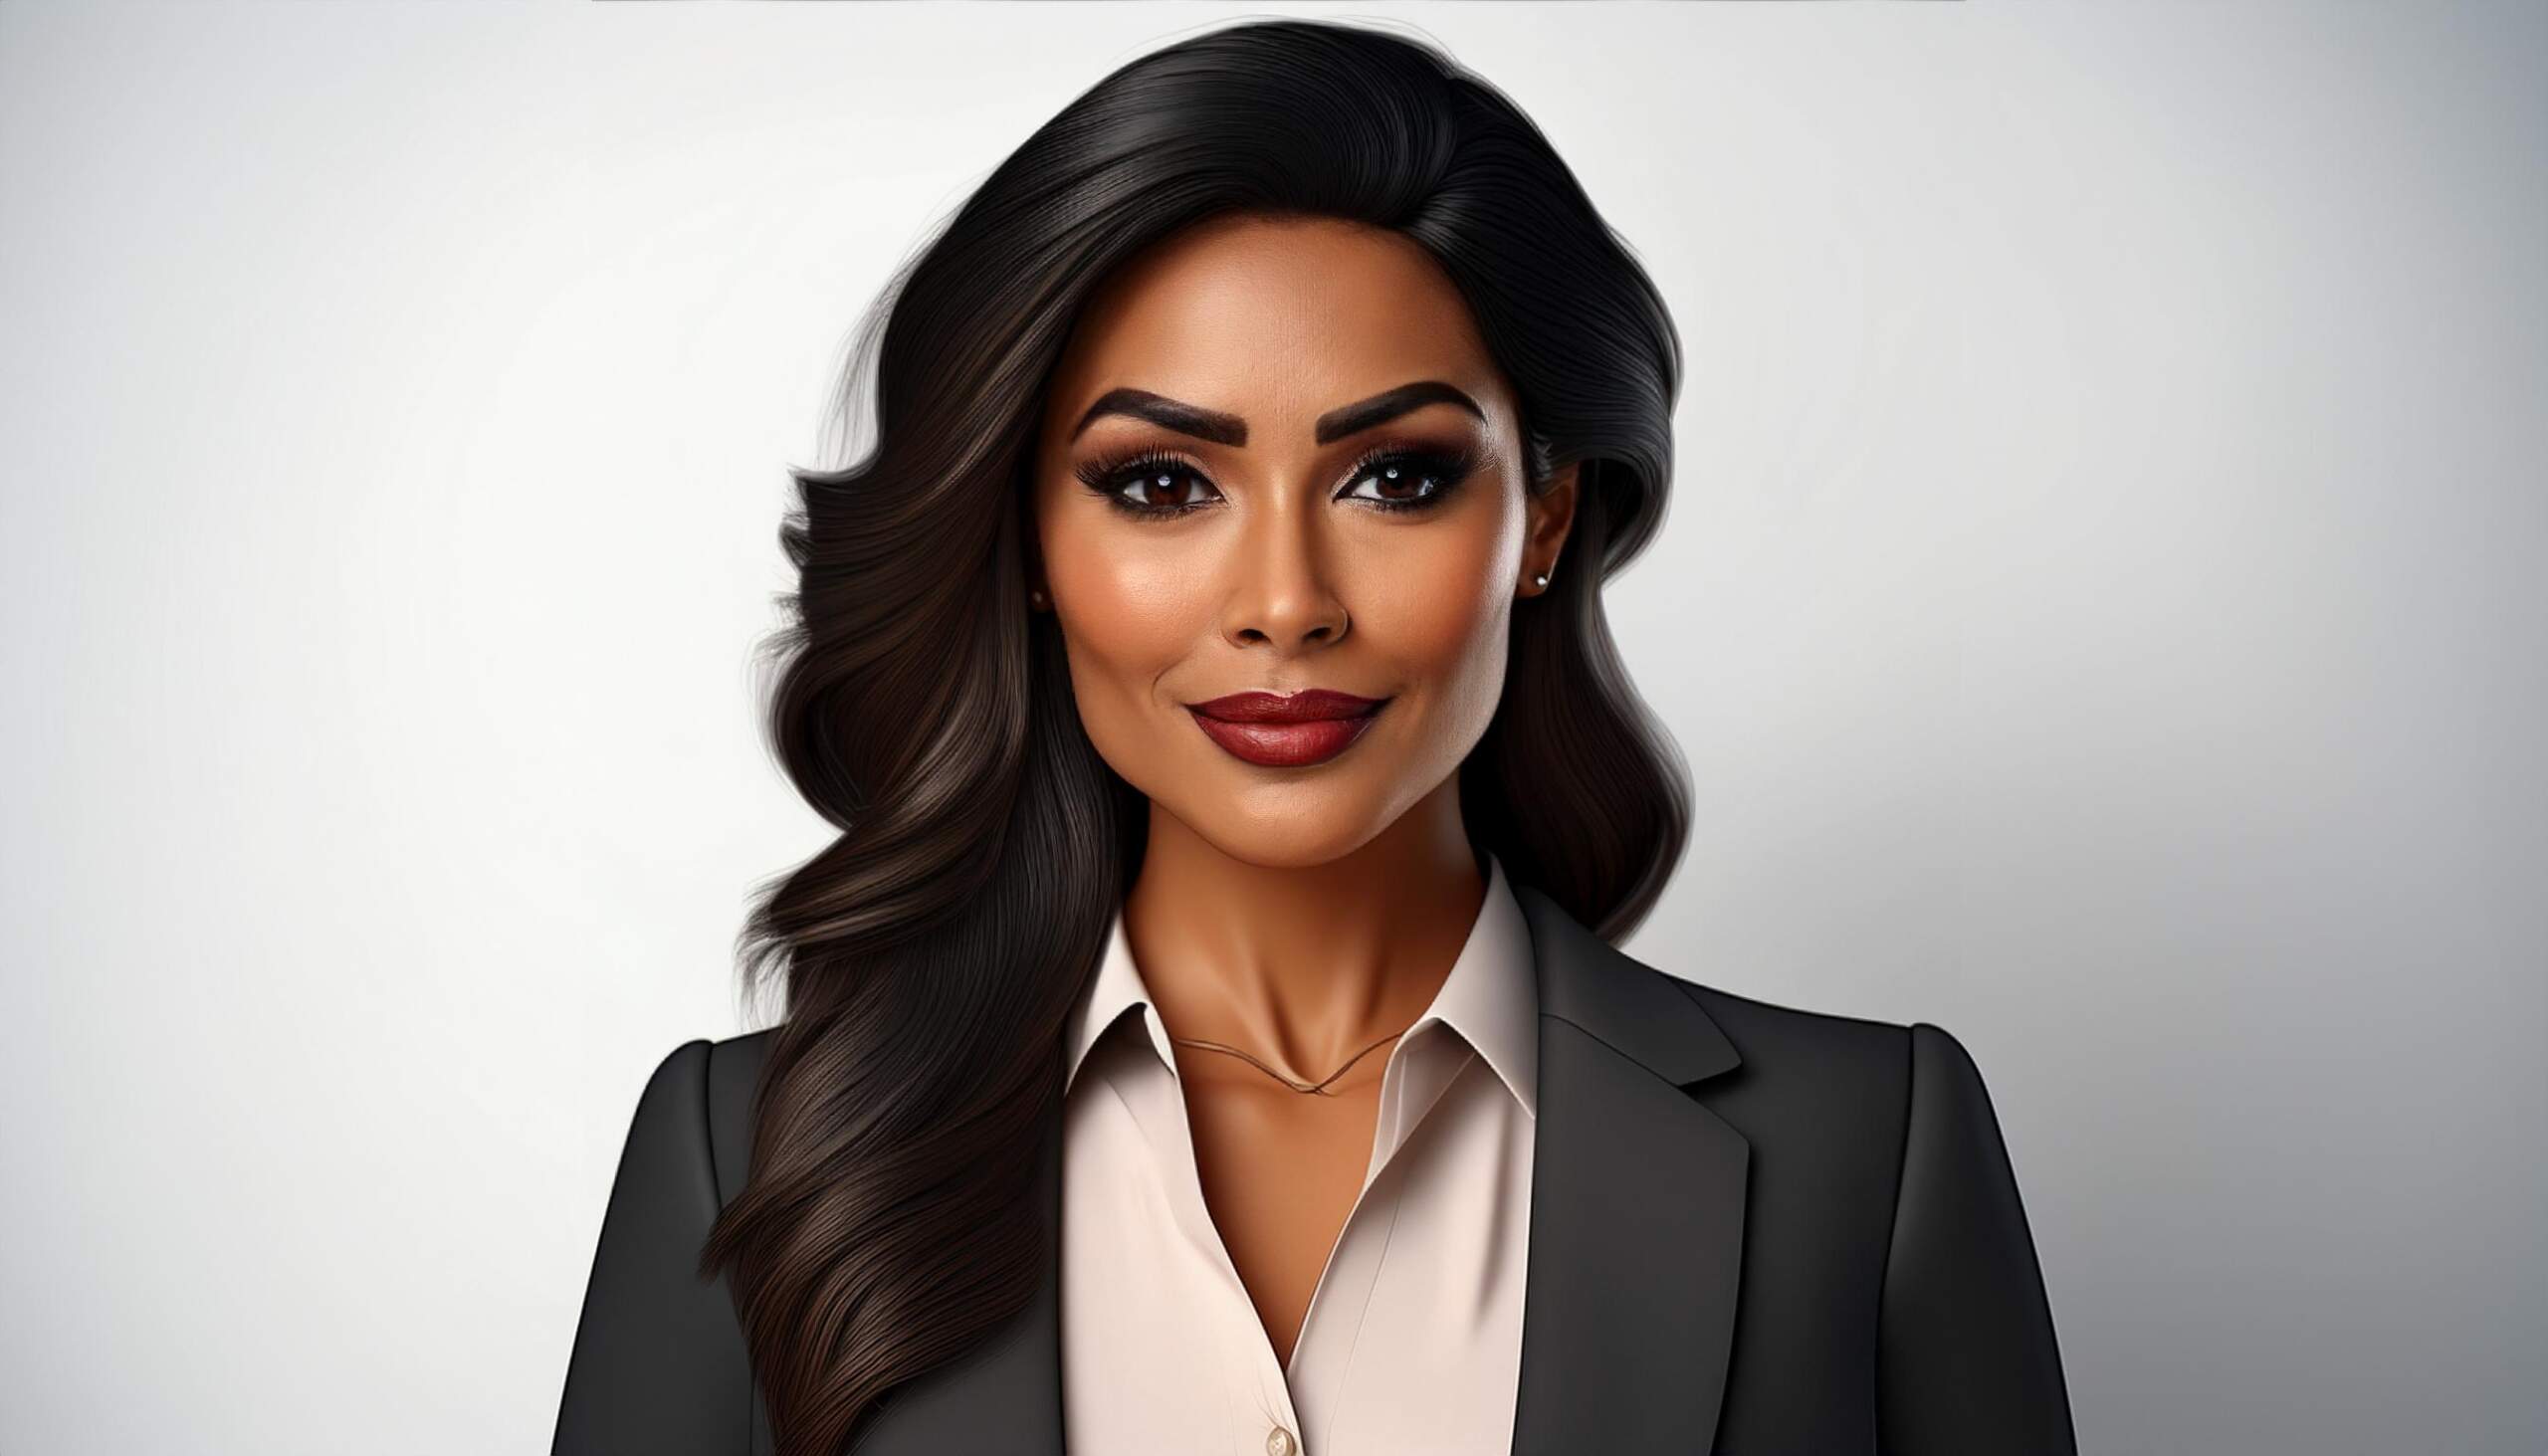 A business woman looking directly at the camera, the background is white